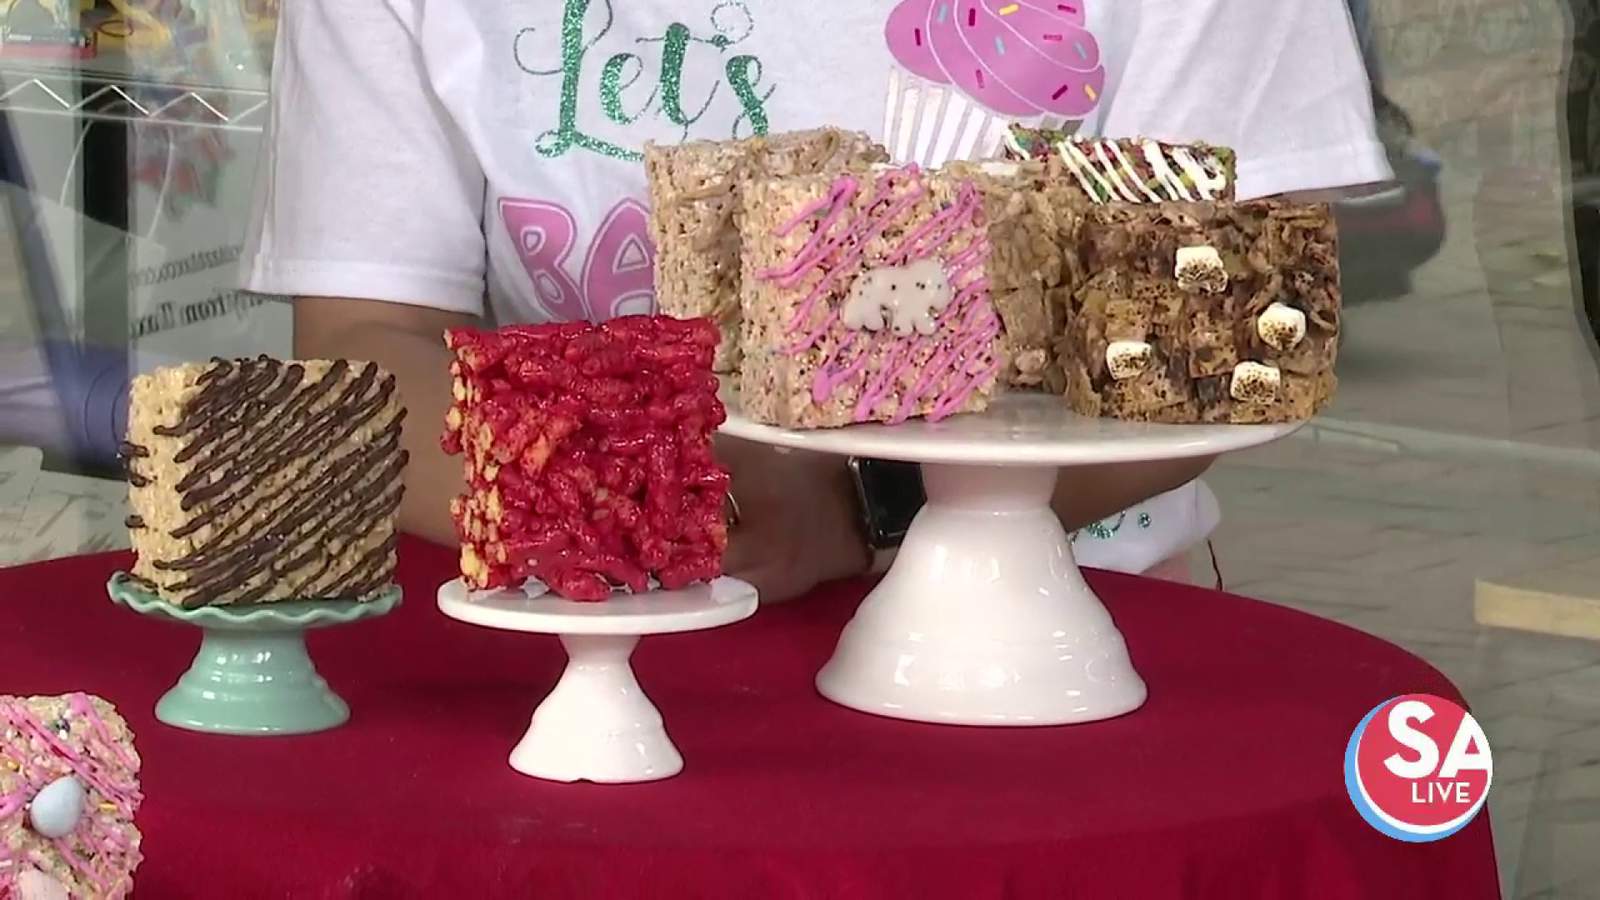 Over-the-top Rice Krispy treats made by local high schooler